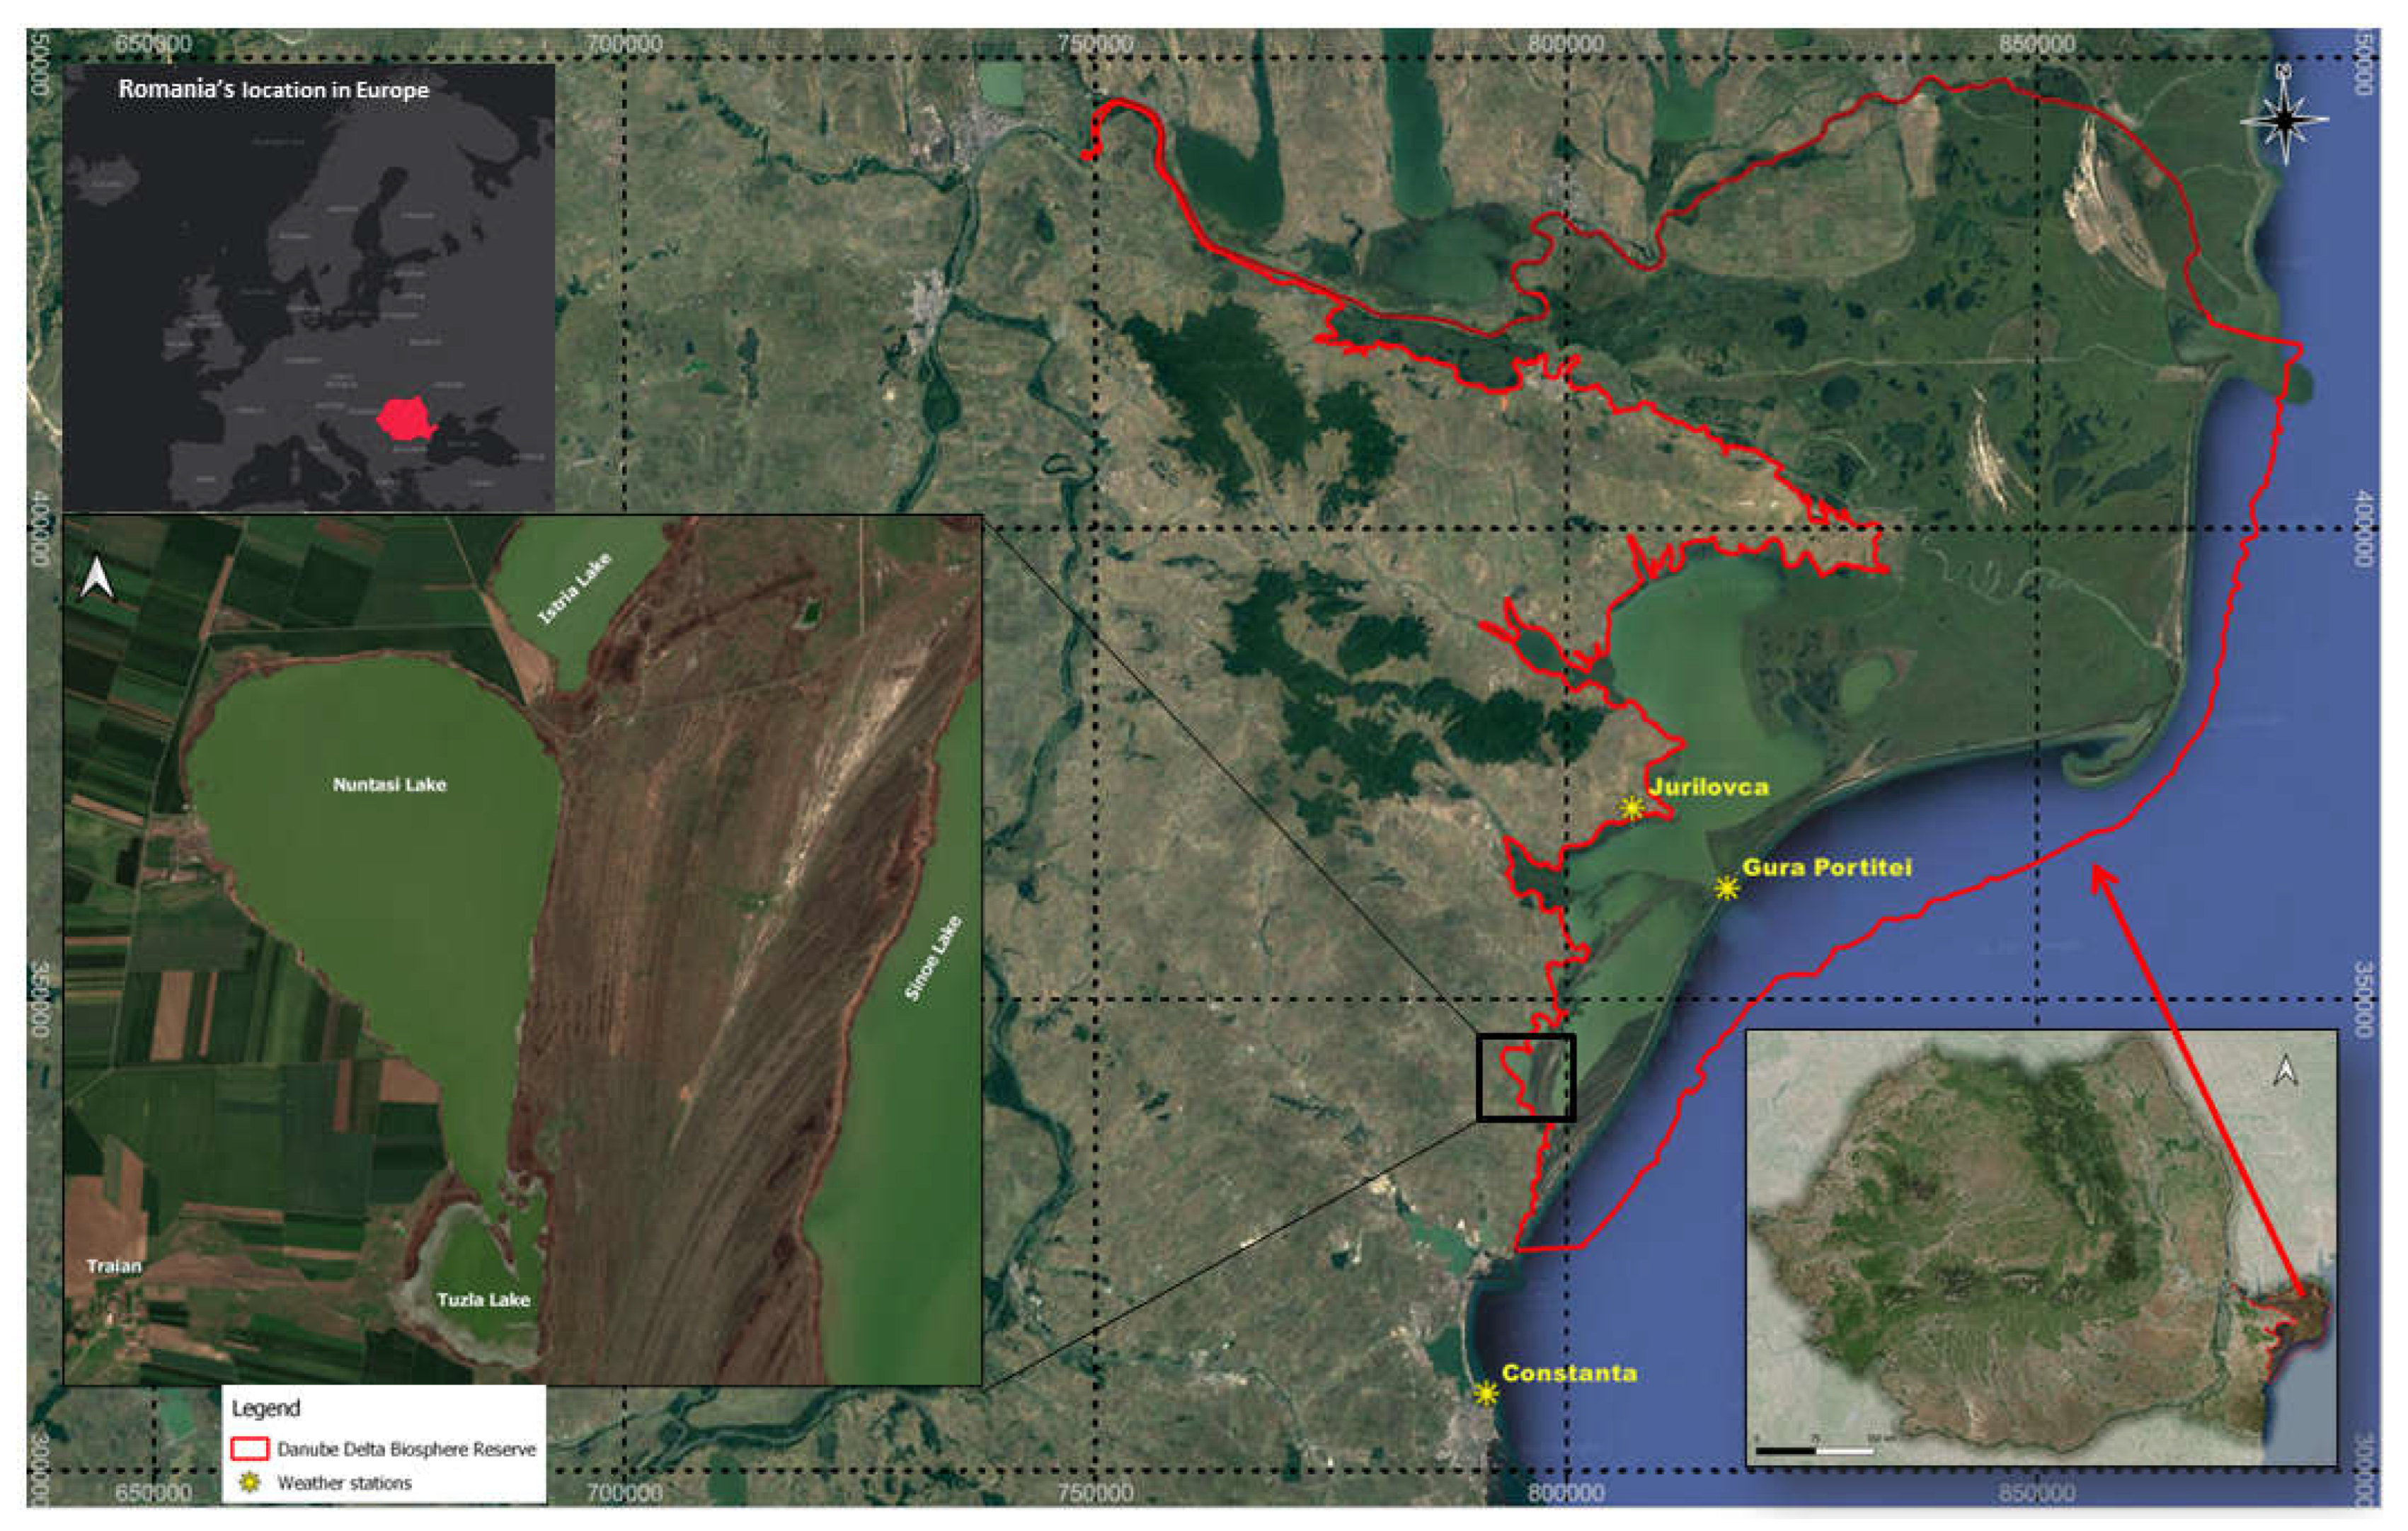 Land | Free Full-Text | Severe Drought Monitoring by Remote Sensing Methods  and Its Impact on Wetlands Birds Assemblages in Nunta&#537;i and Tuzla  Lakes (Danube Delta Biosphere Reserve) | HTML